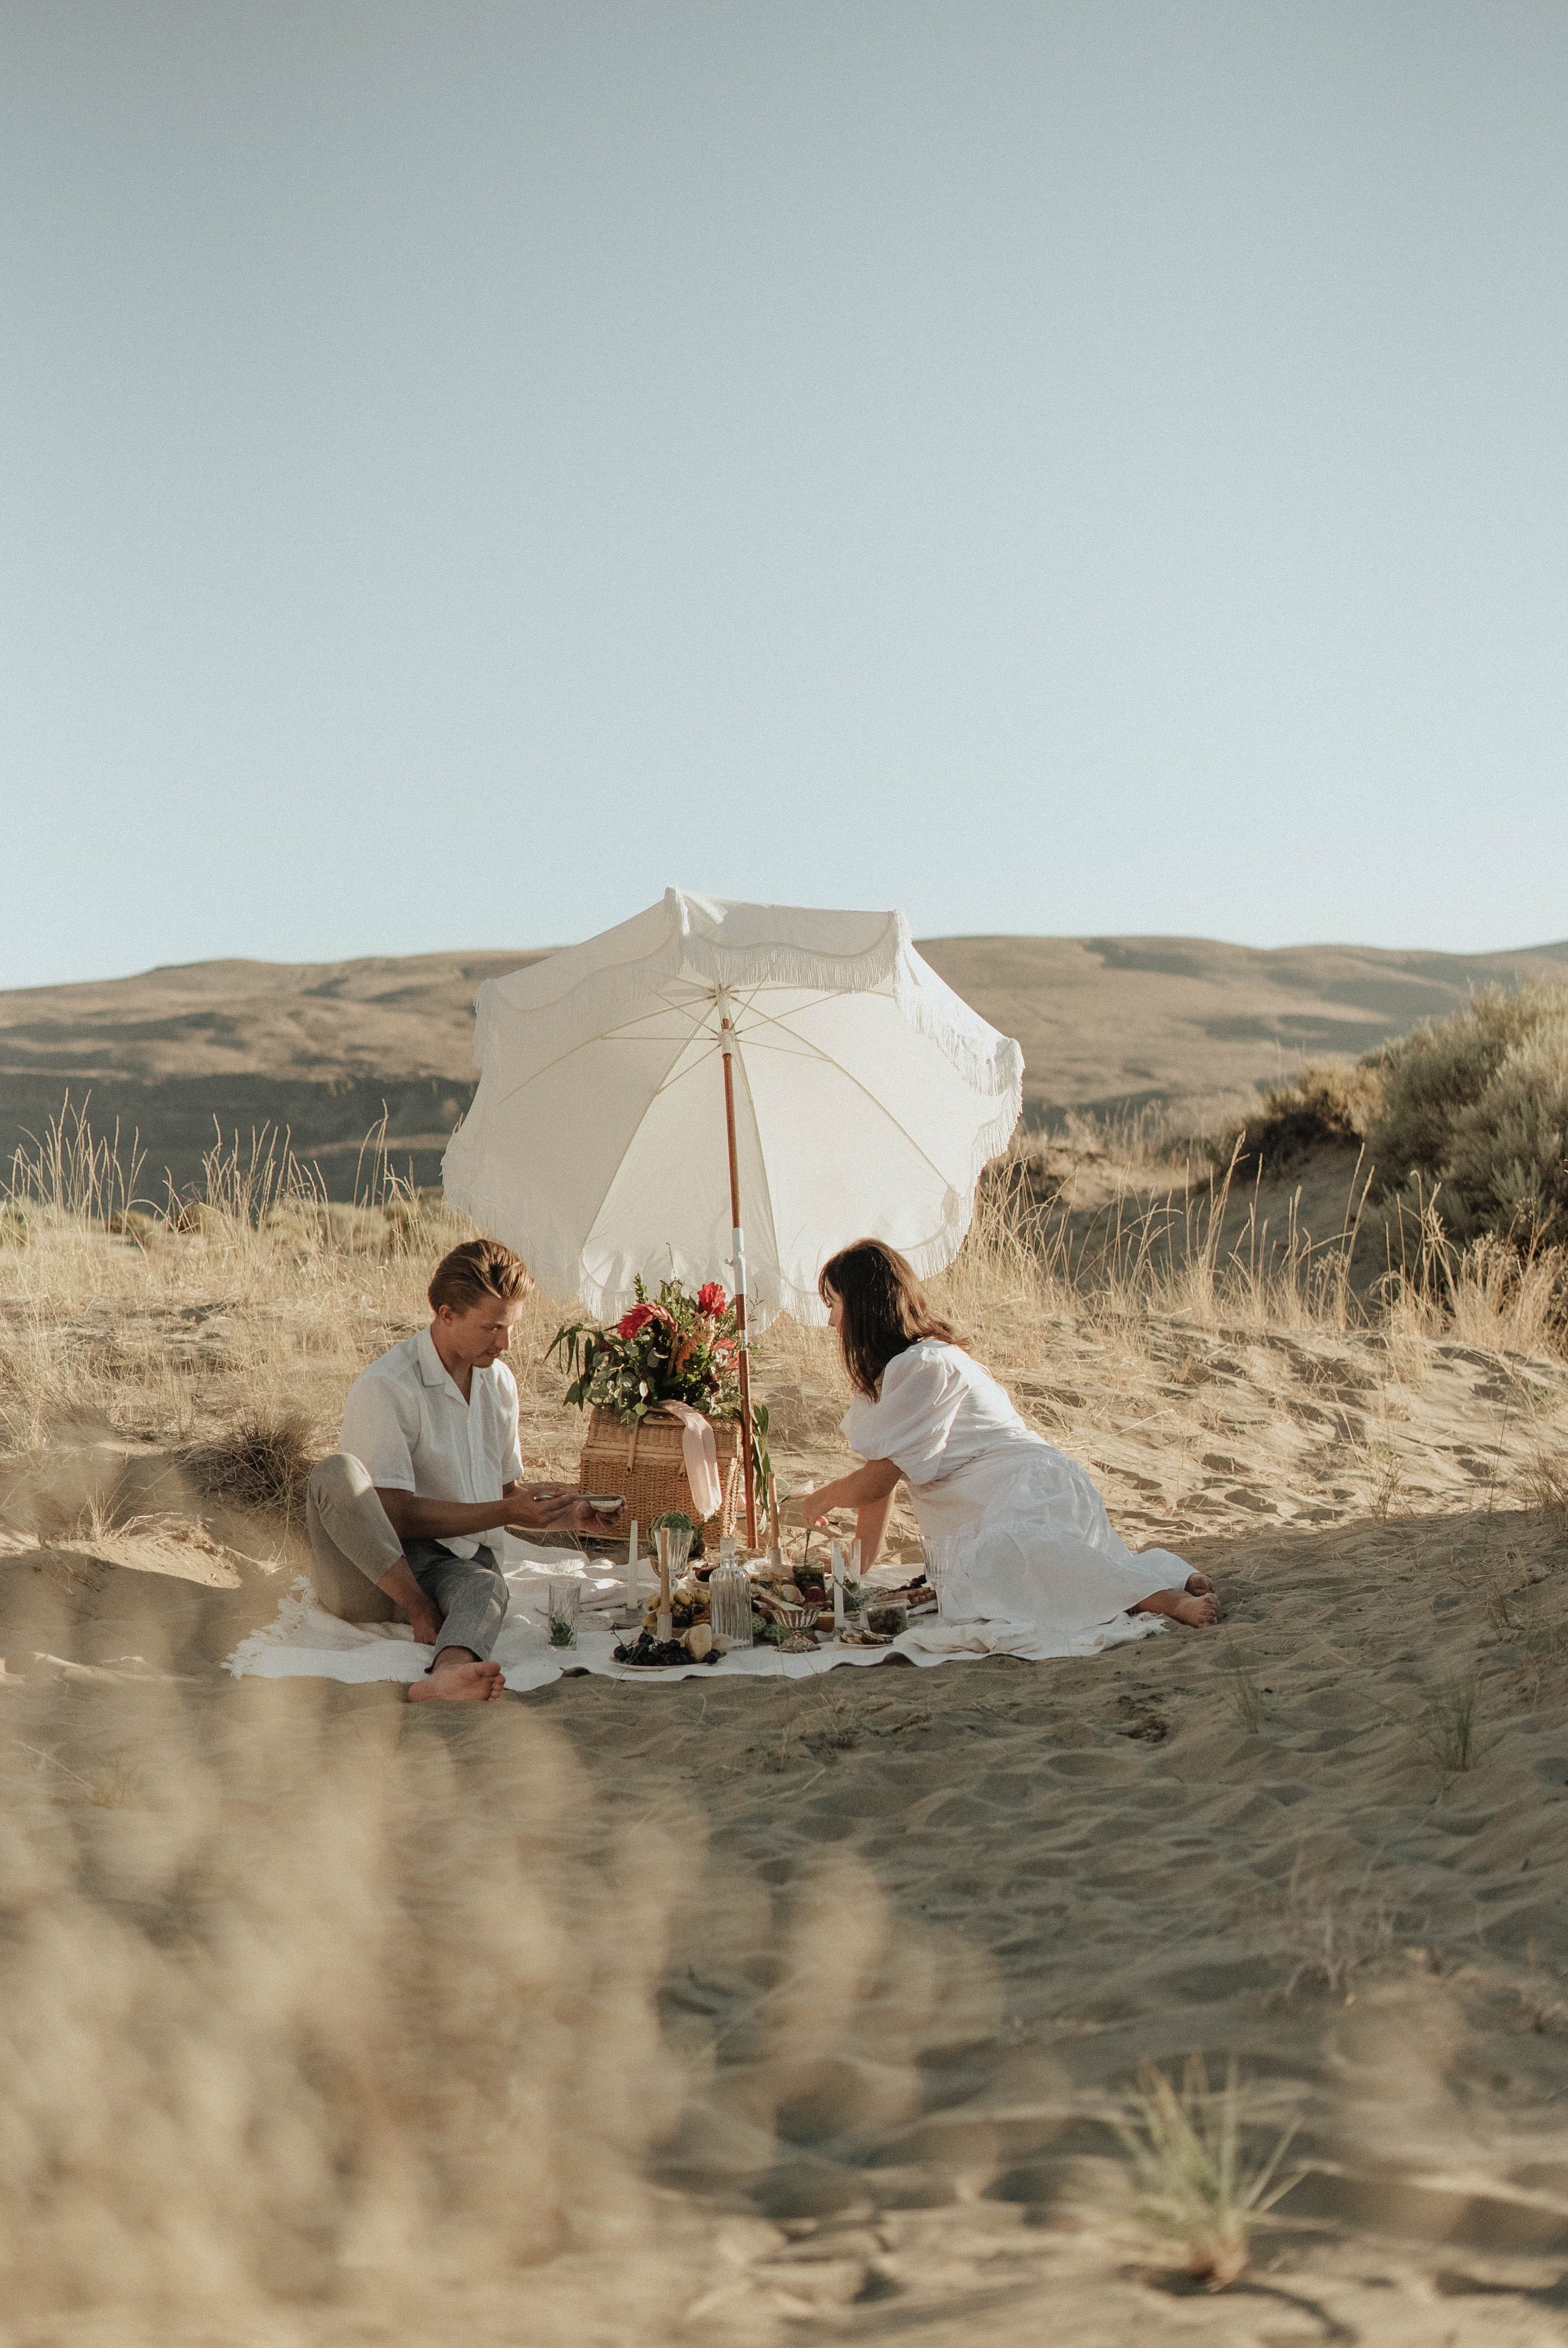 A couple having an outdoor picnic | Source: Pexels